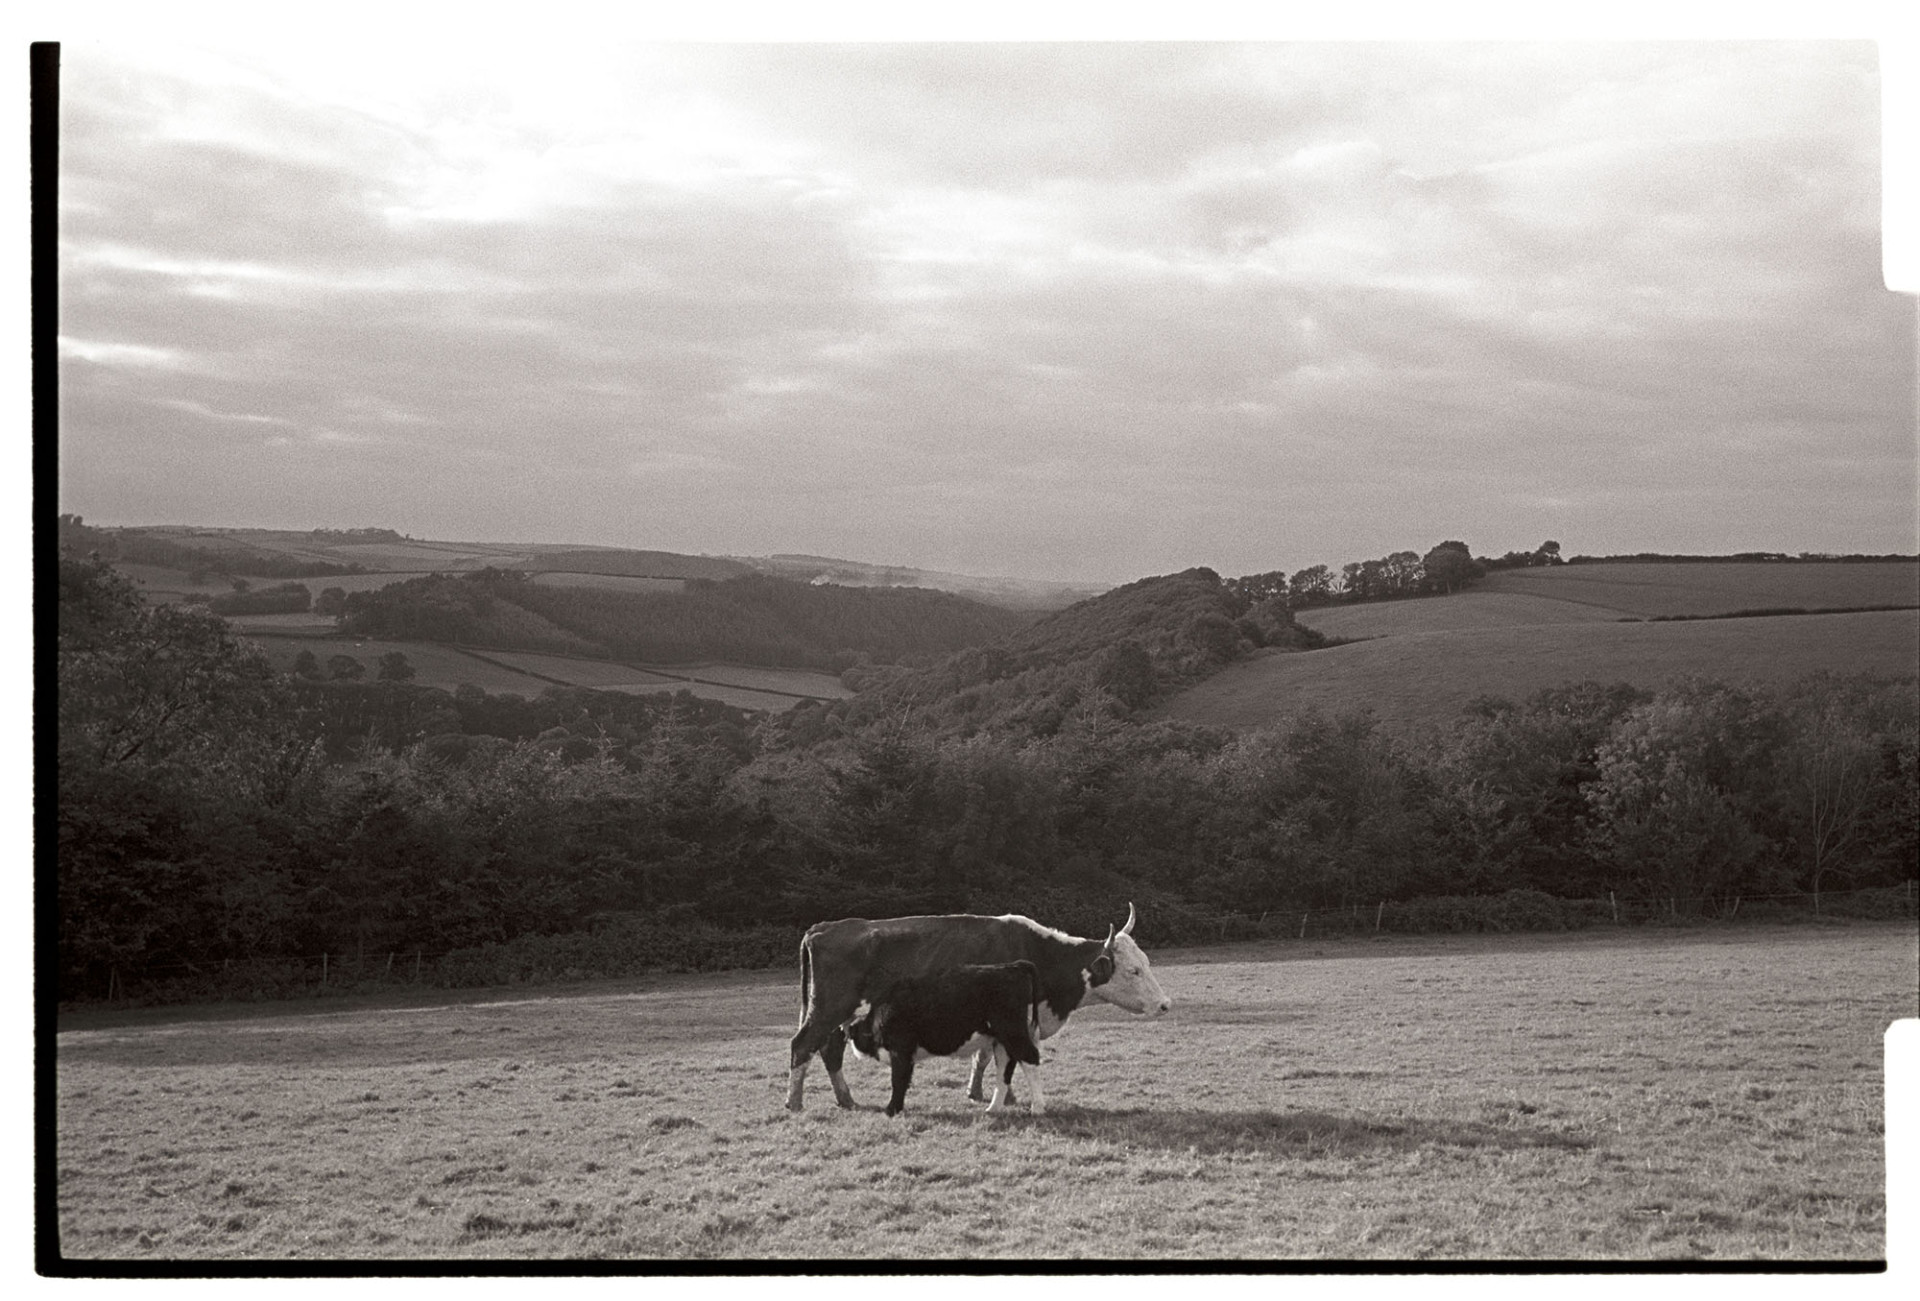 Evening landscape with cow and suckling calf. 
[A horned cow with a suckling calf in a field at Ashwell, Dolton, in the evening. A landscape with hills, fields, trees and woodland is visible in the background.]